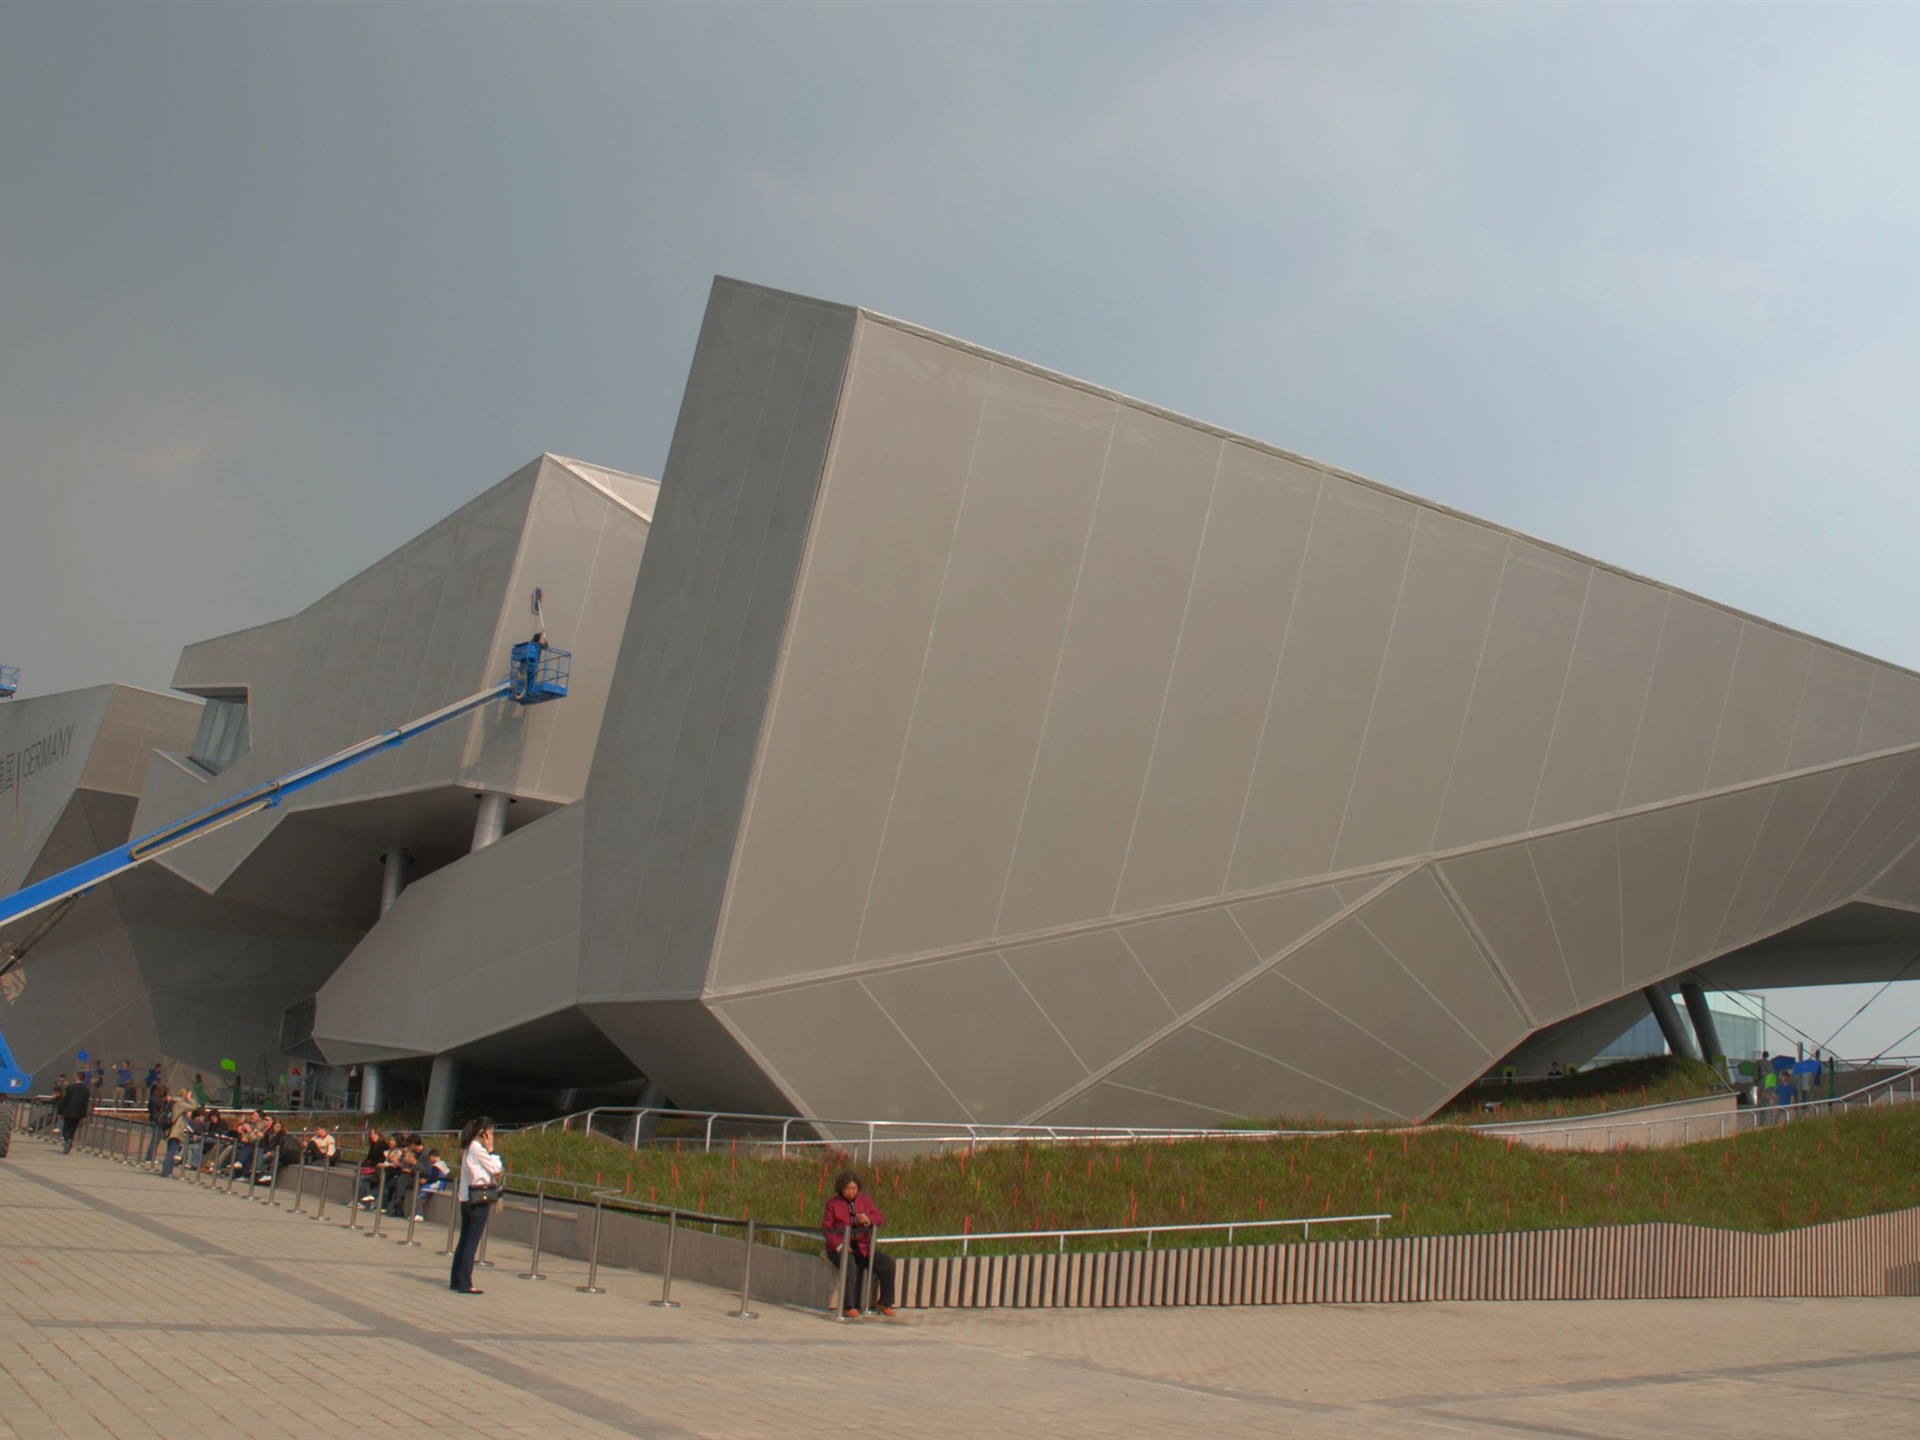 Commissioning of the 2010 Shanghai World Expo (studious works) #21 - 1920x1440